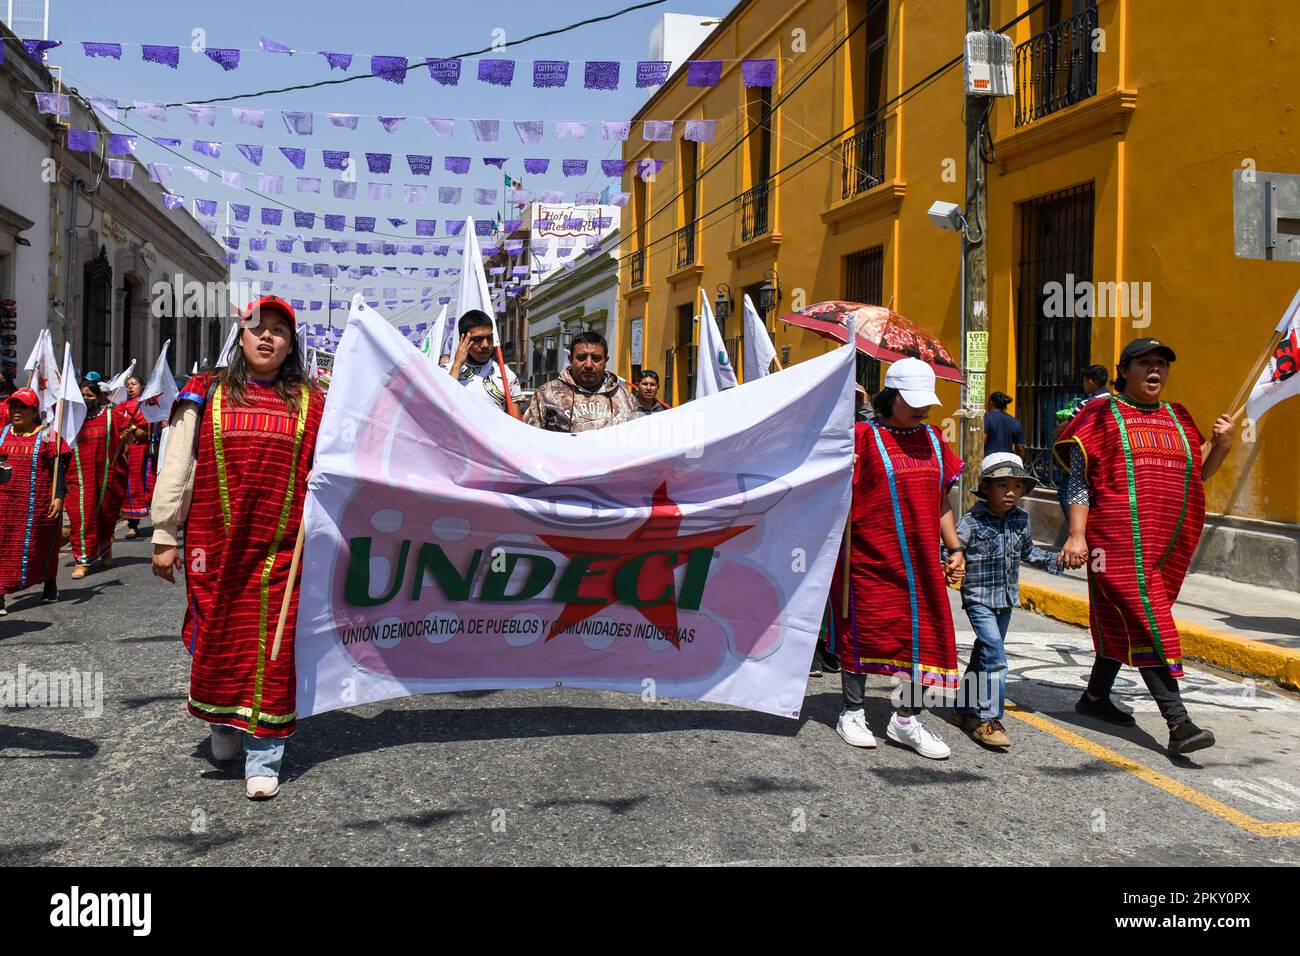 Indigenous people belonging a Union protest in Oaxaca city Mexico. Oaxaca is known as a hub for social justice and activism . Stock Photo